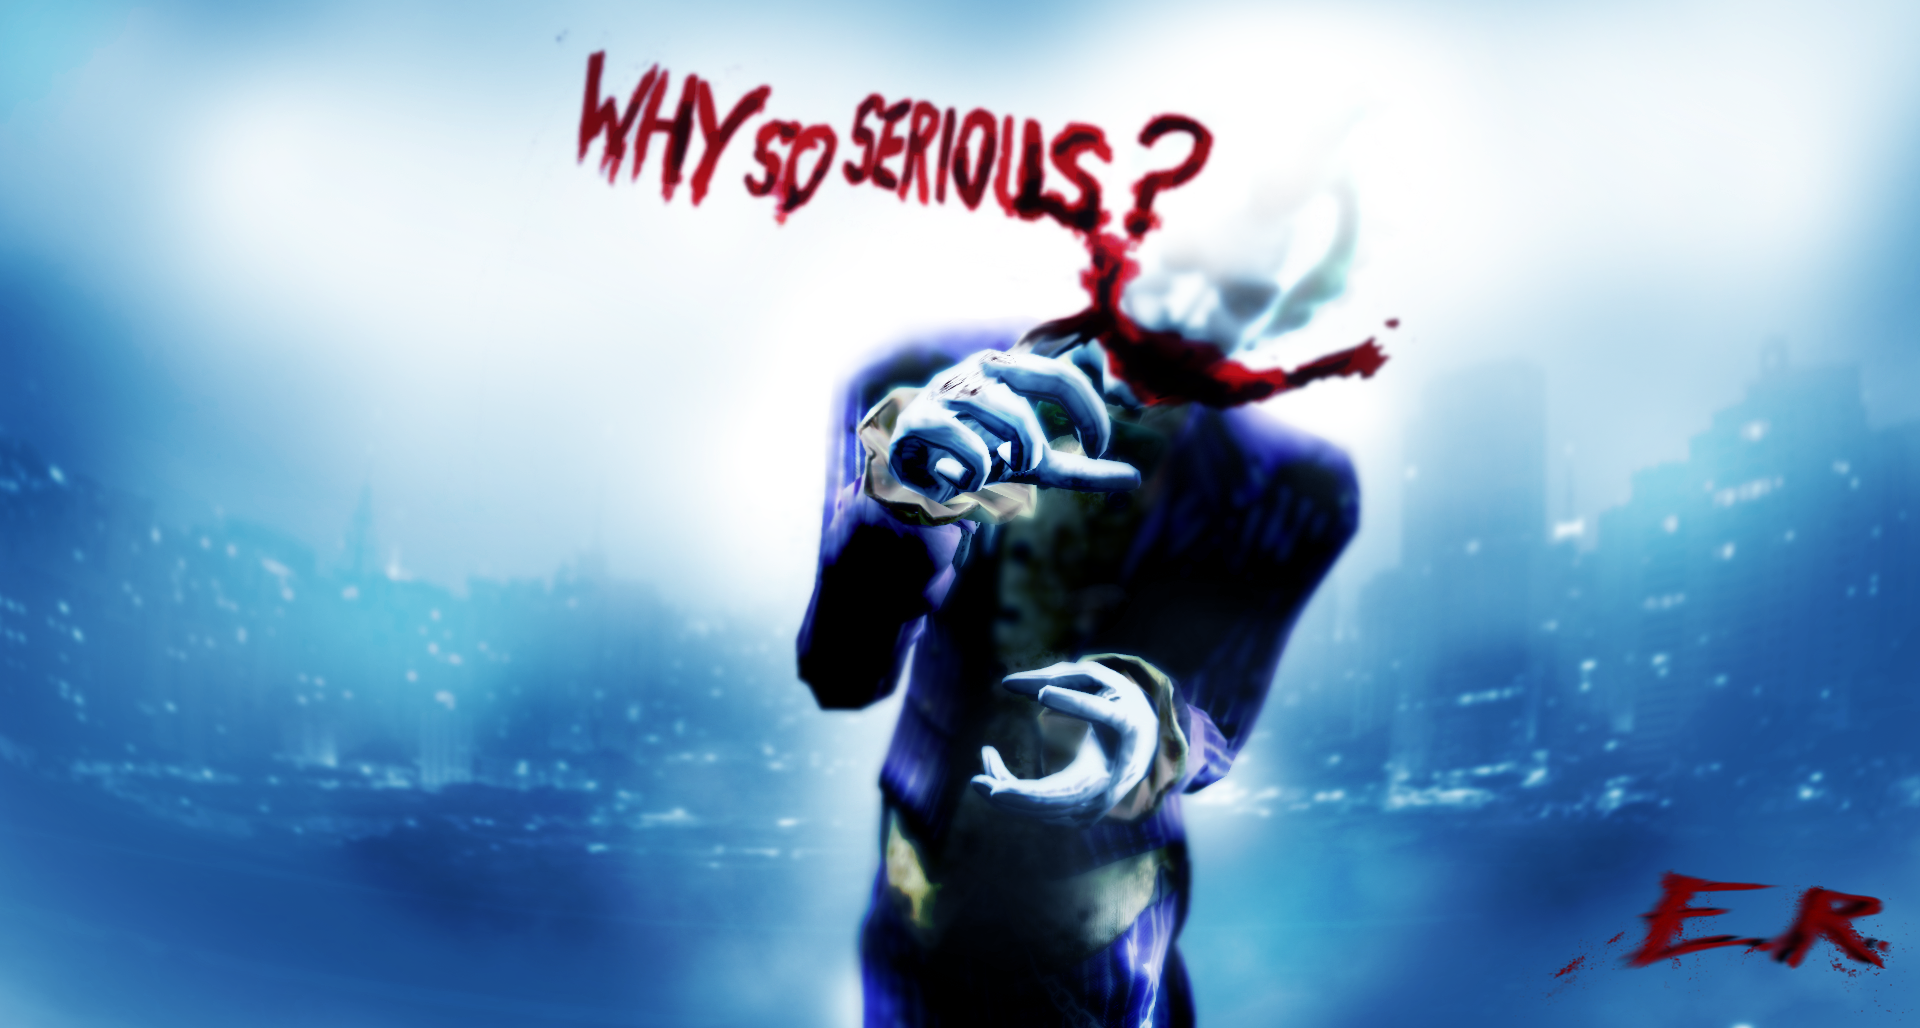 The joker stencil why so serious serious wallpaper  39223